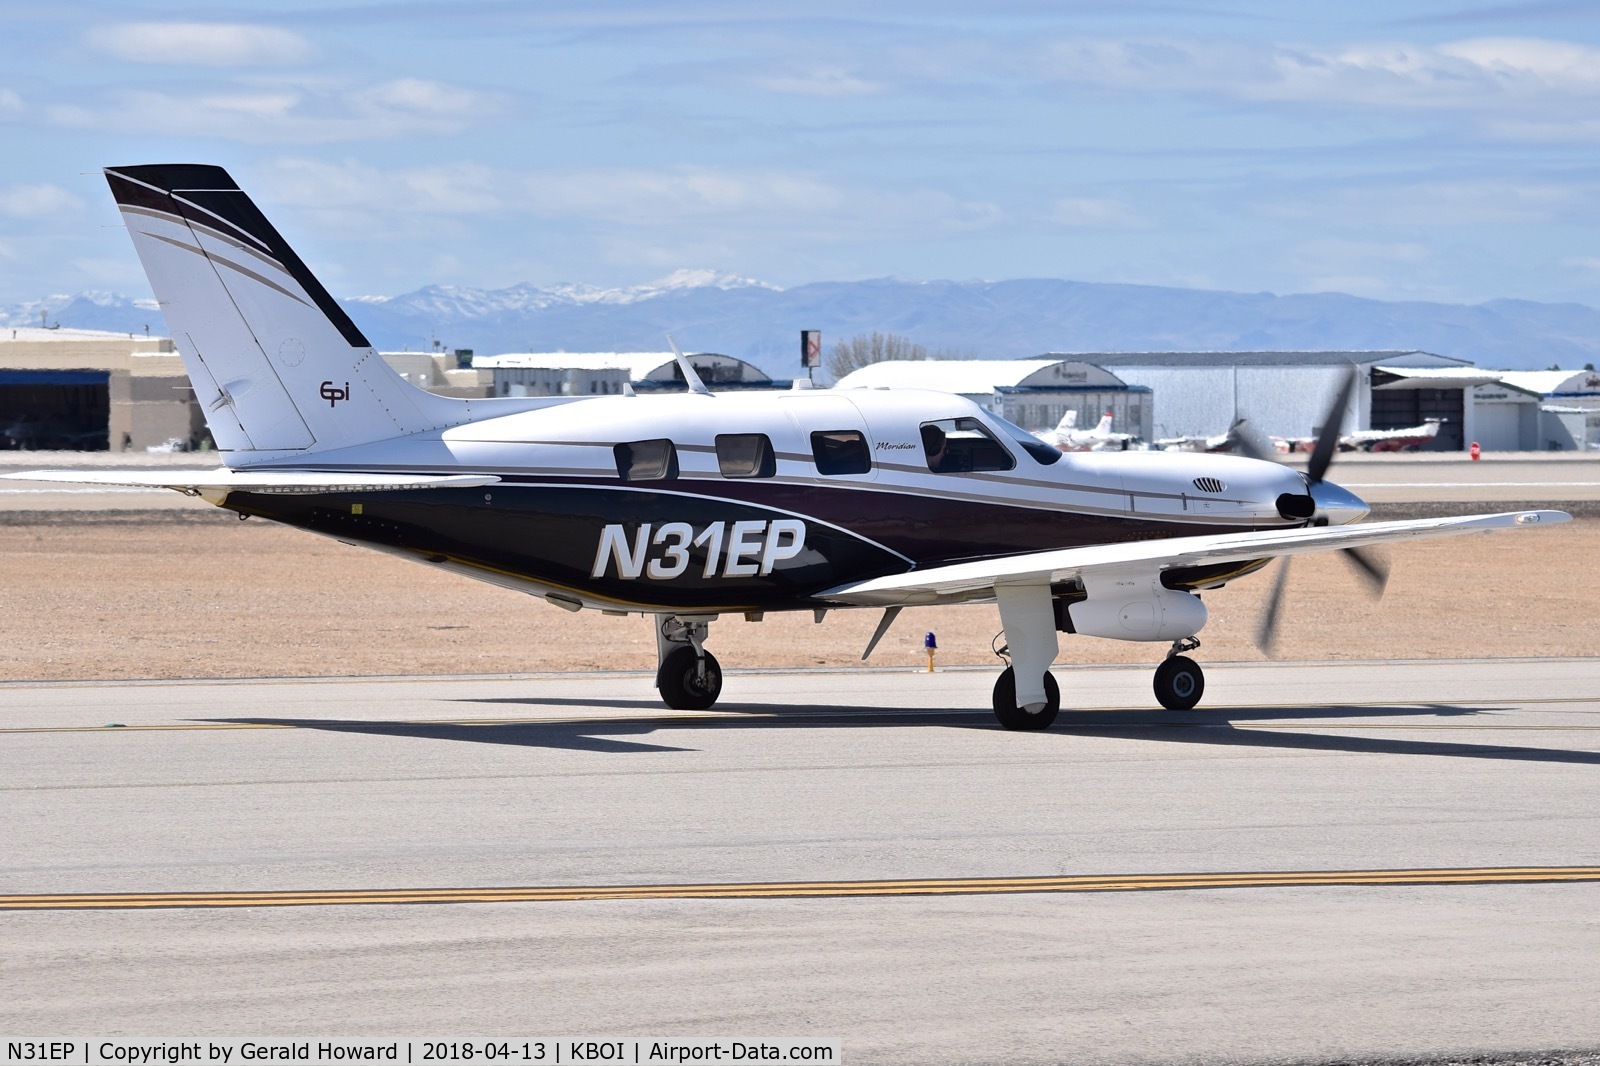 N31EP, 2009 Piper PA-46-500TP C/N 4697415, Taxiing on Alpha to north GA ramp.